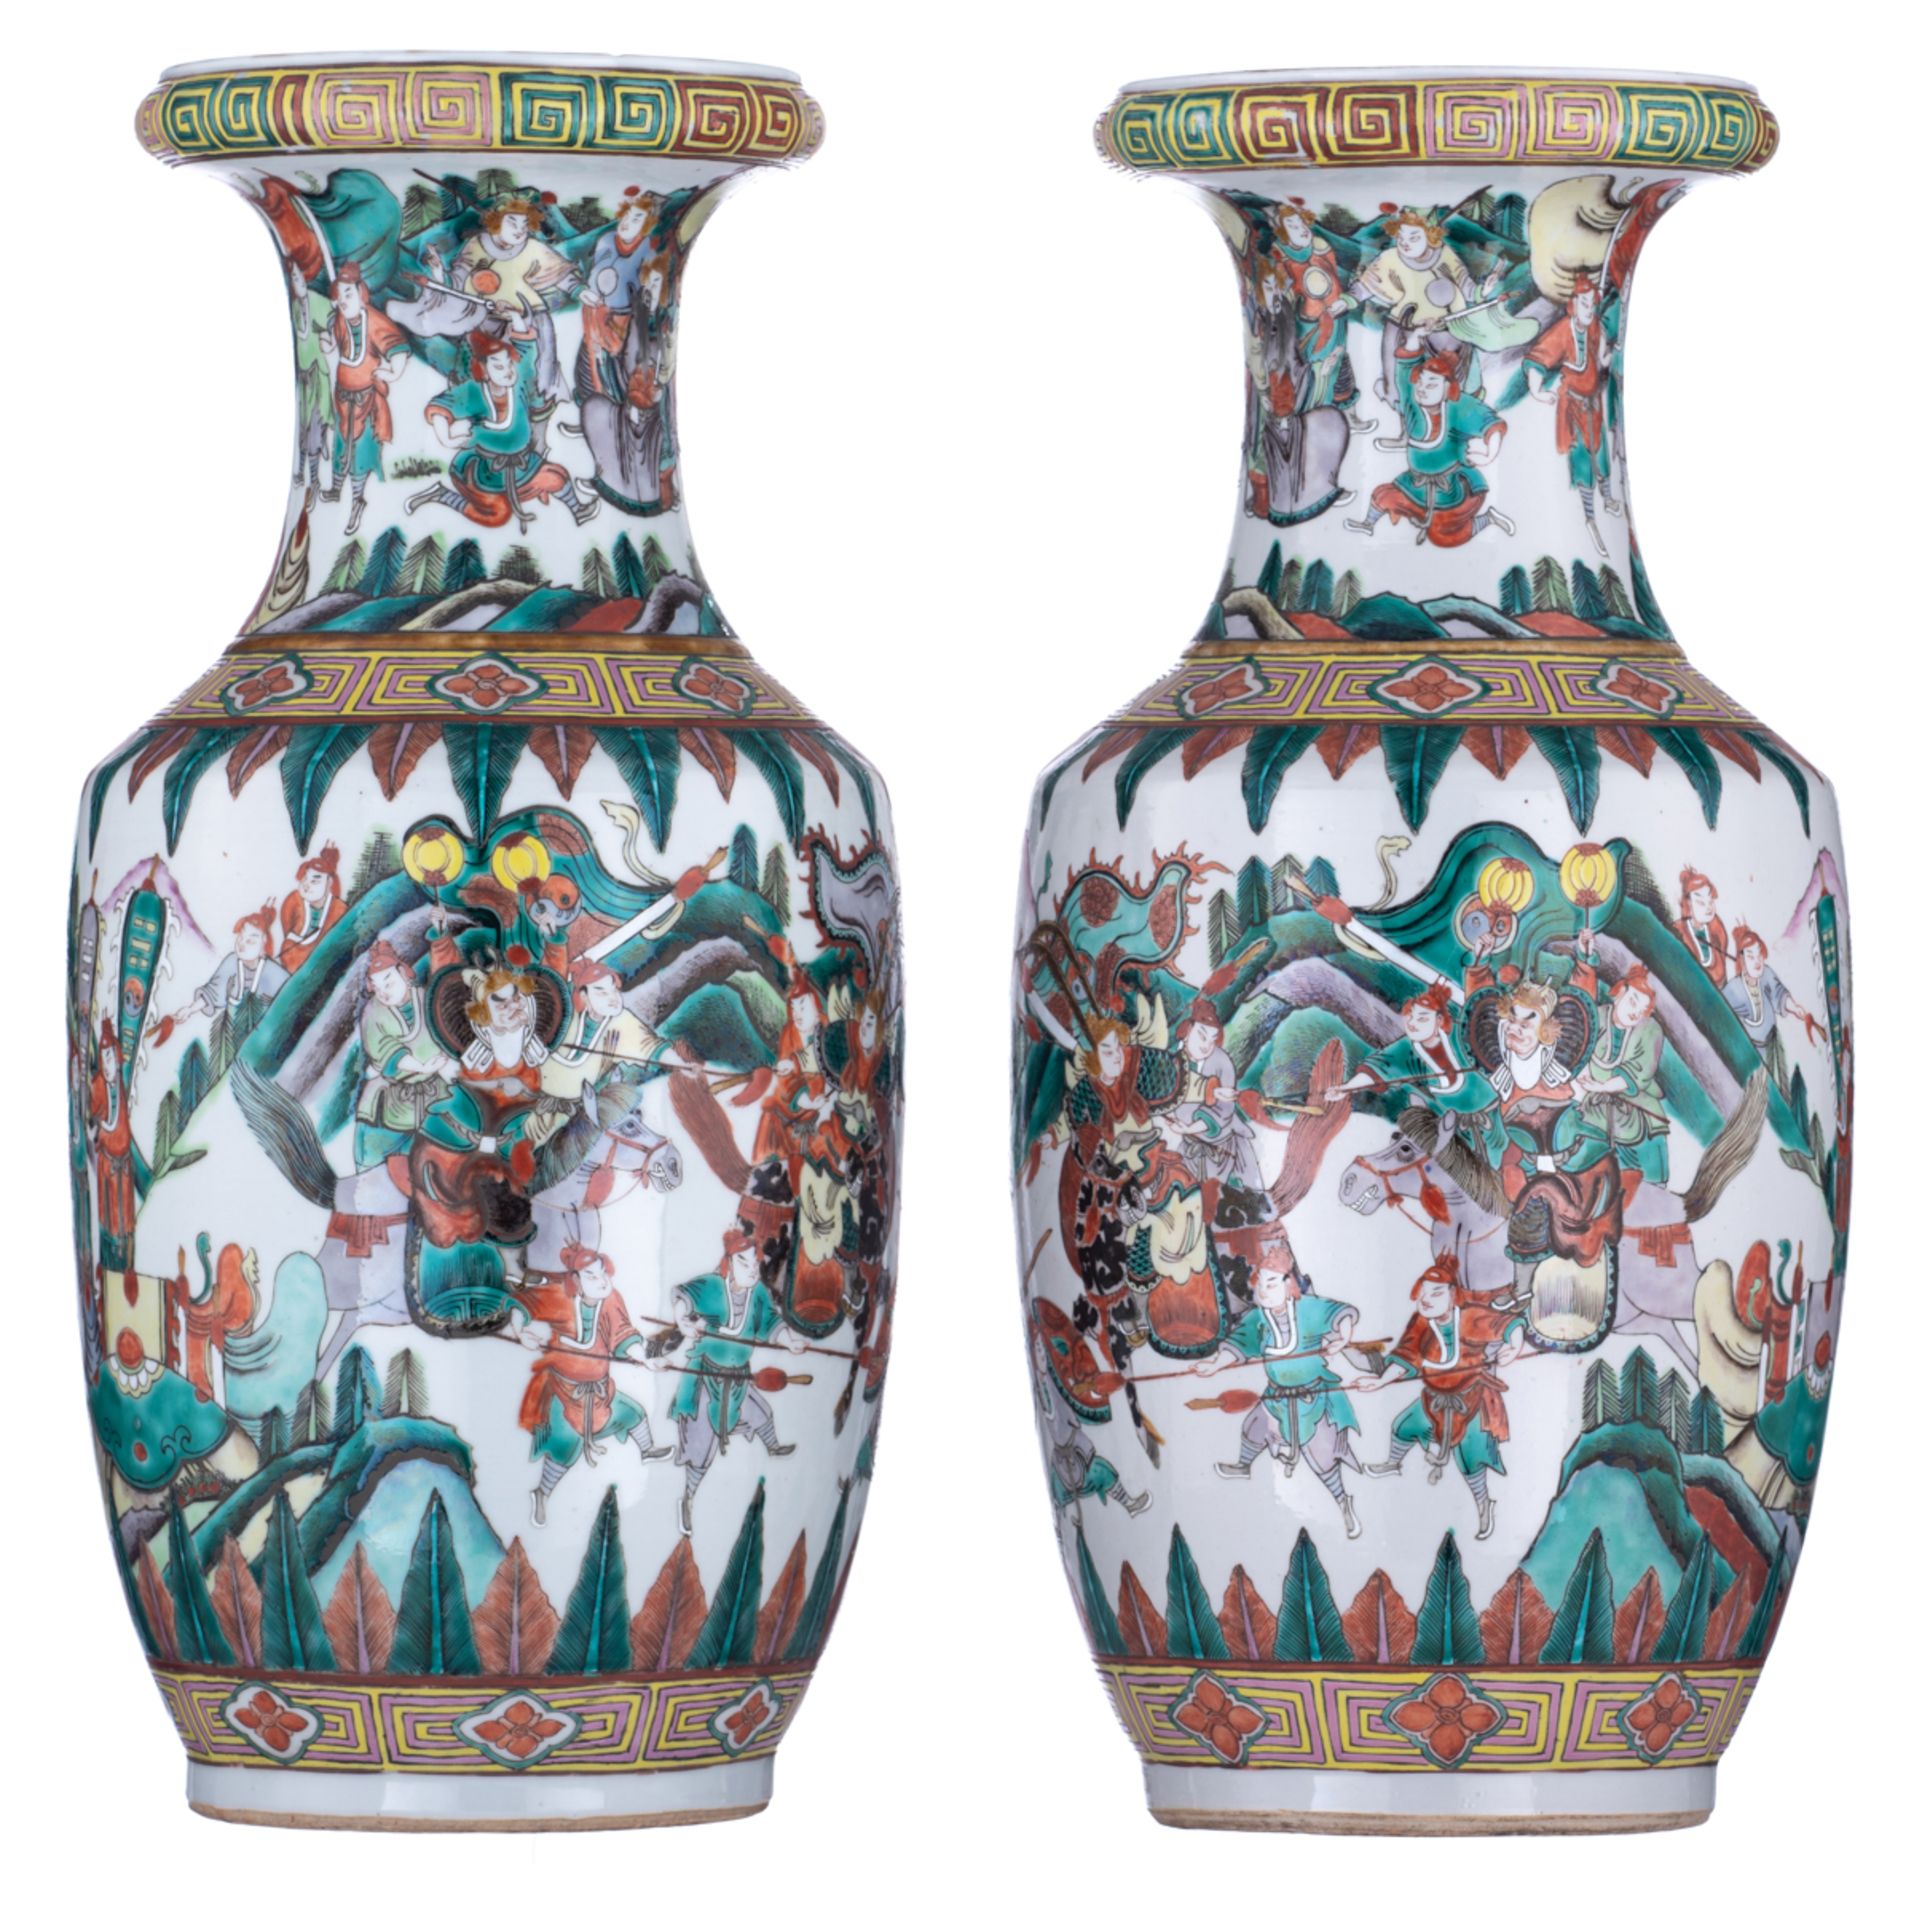 A pair of Chinese famille verte vases, decorated with a scene from 'The Romance of the Three Kingdom